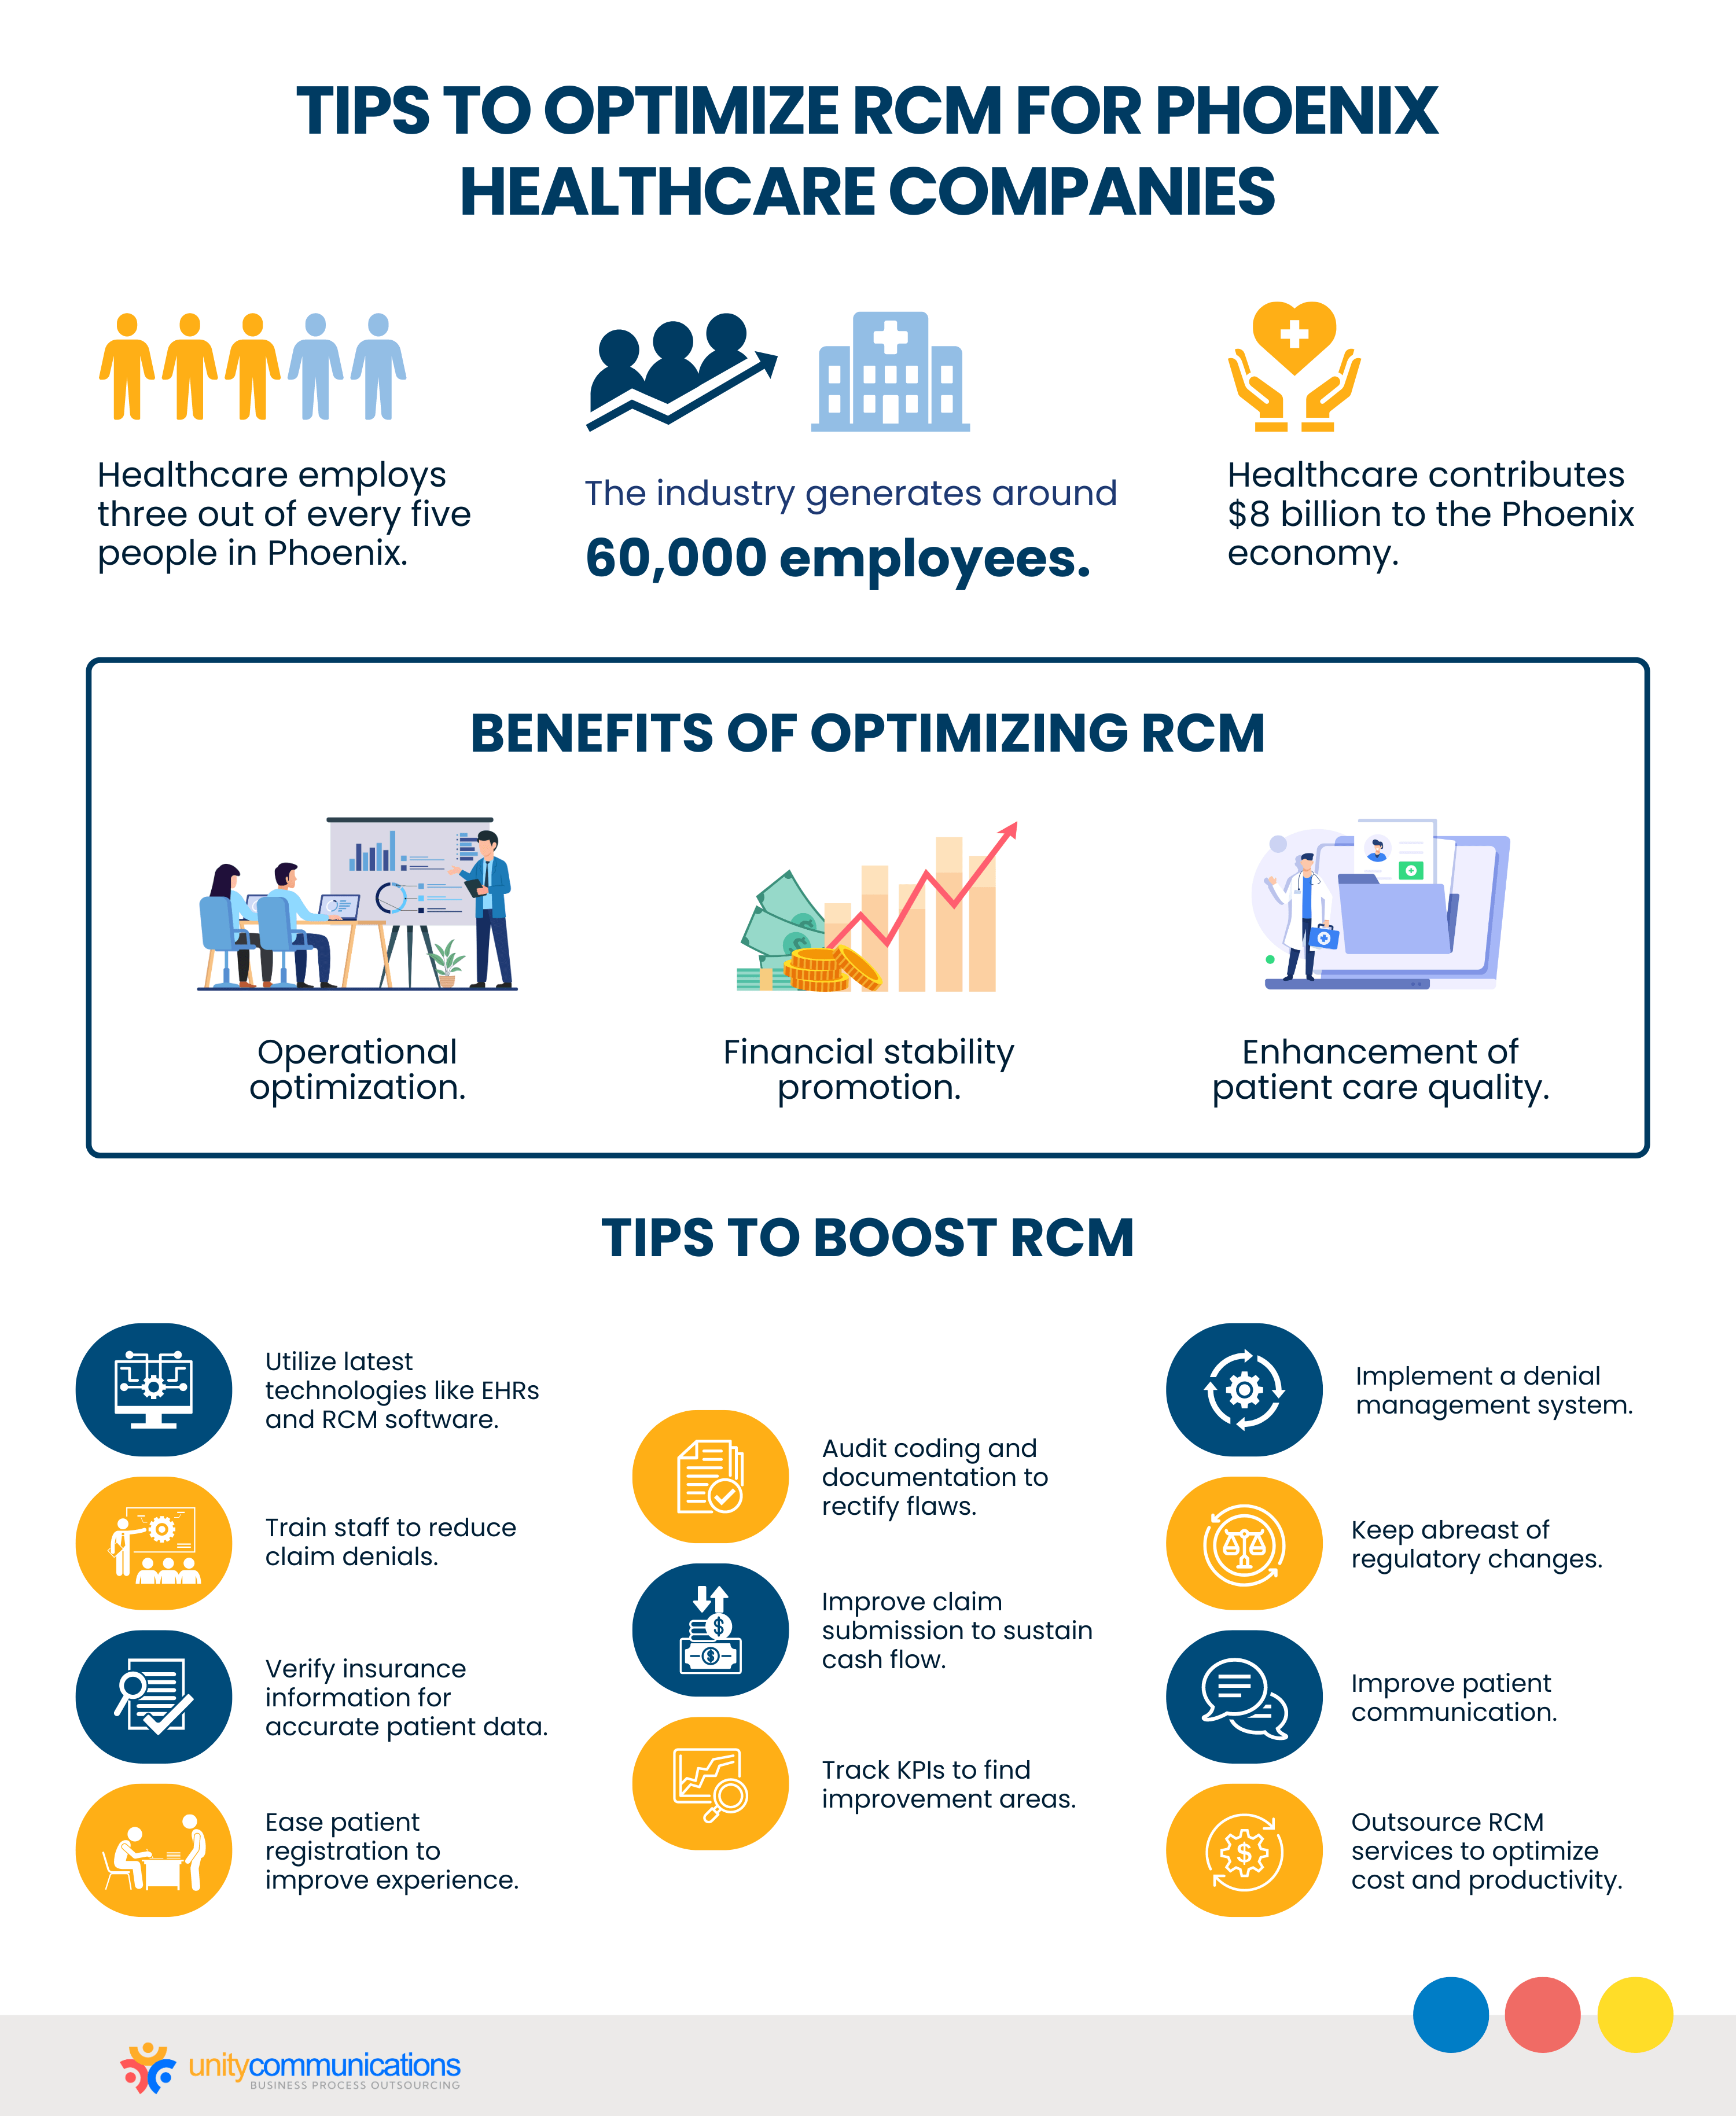 Tips to Optimize RCM for Phoenix Healthcare Companies